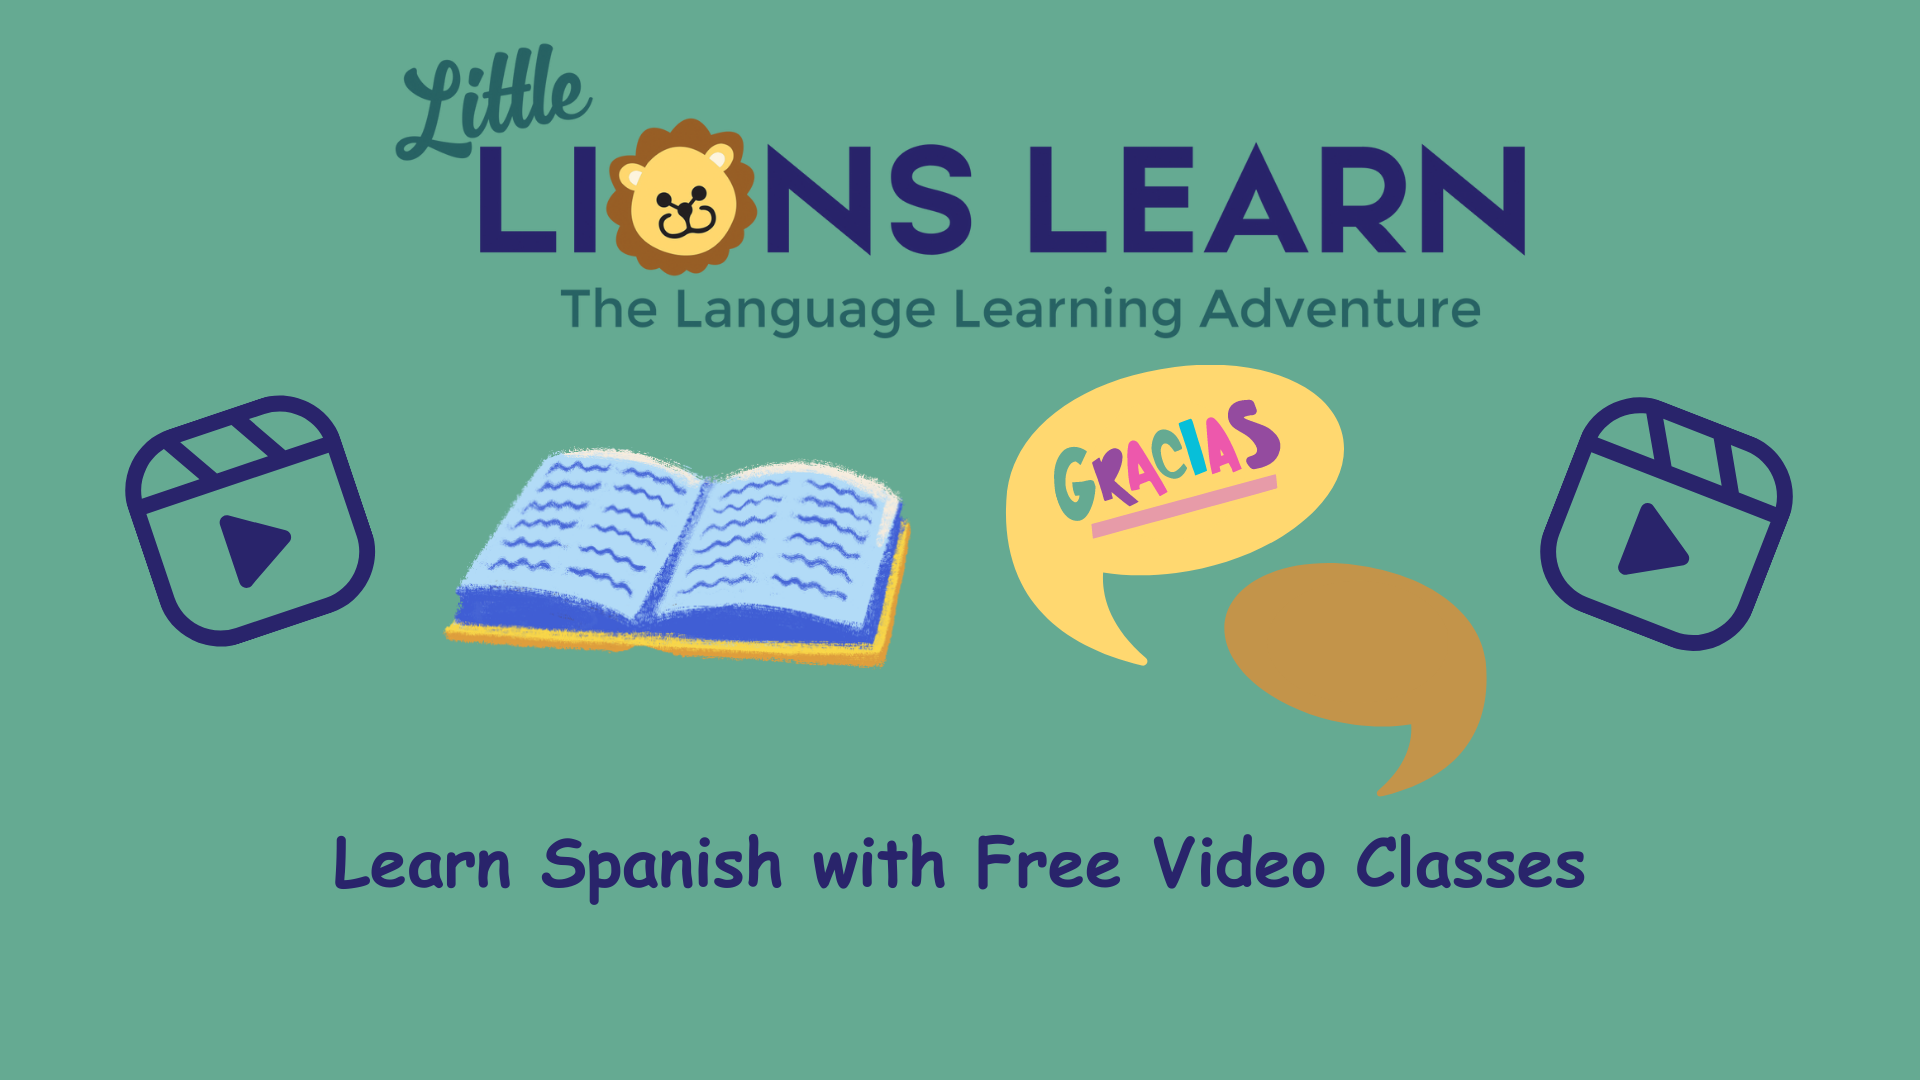 Learn Spanish with Free Video Classes